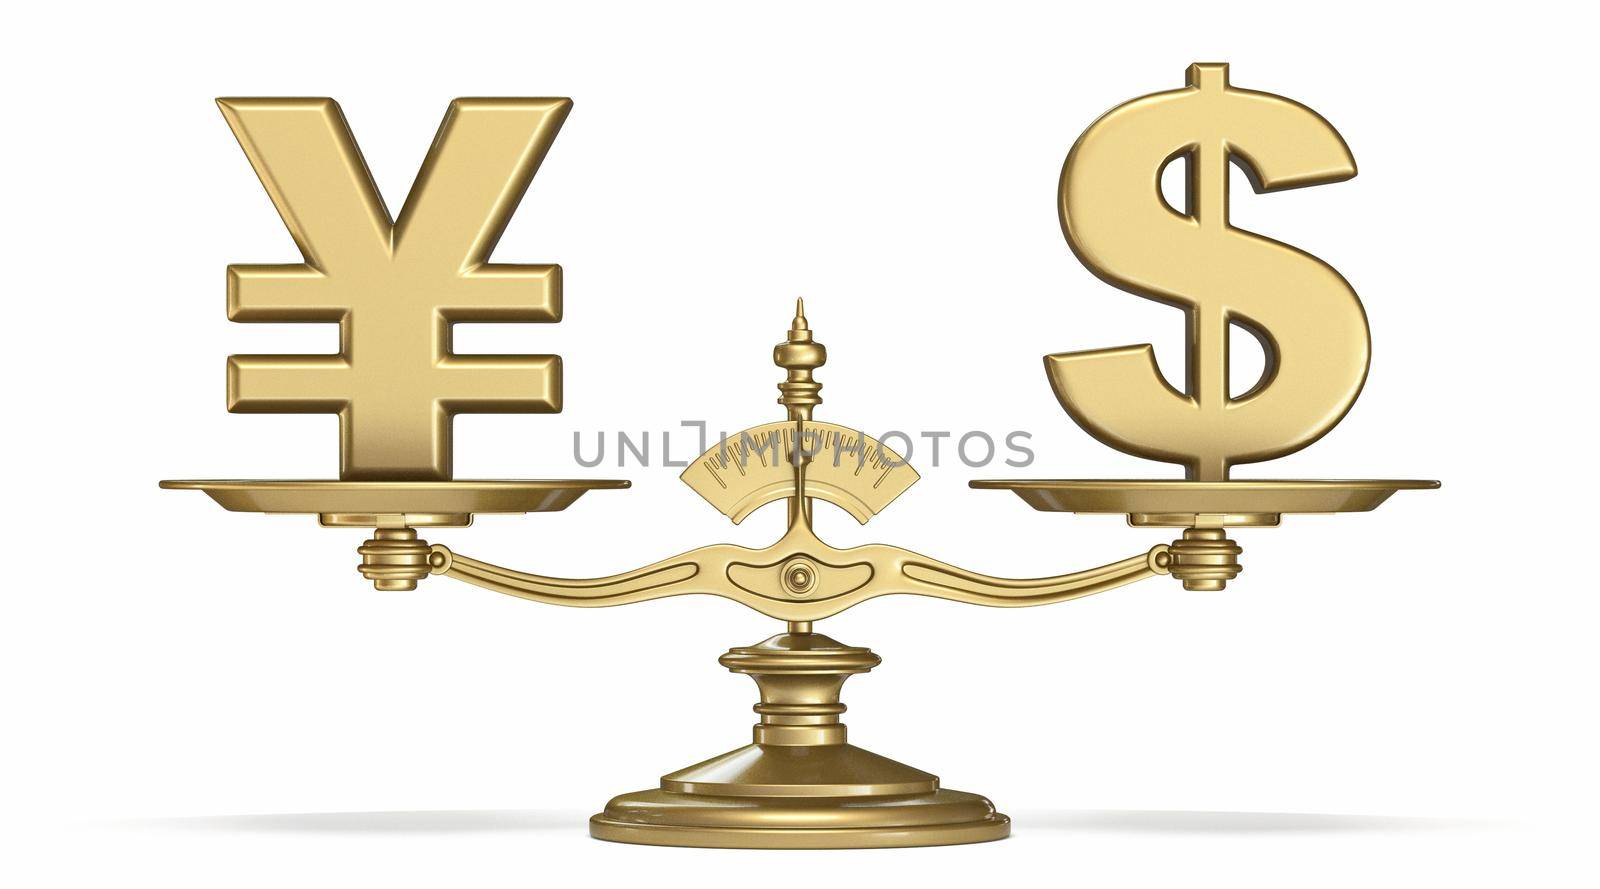 Yen and dollar currencies sign on golden scale 3D render illustration isolated on white background